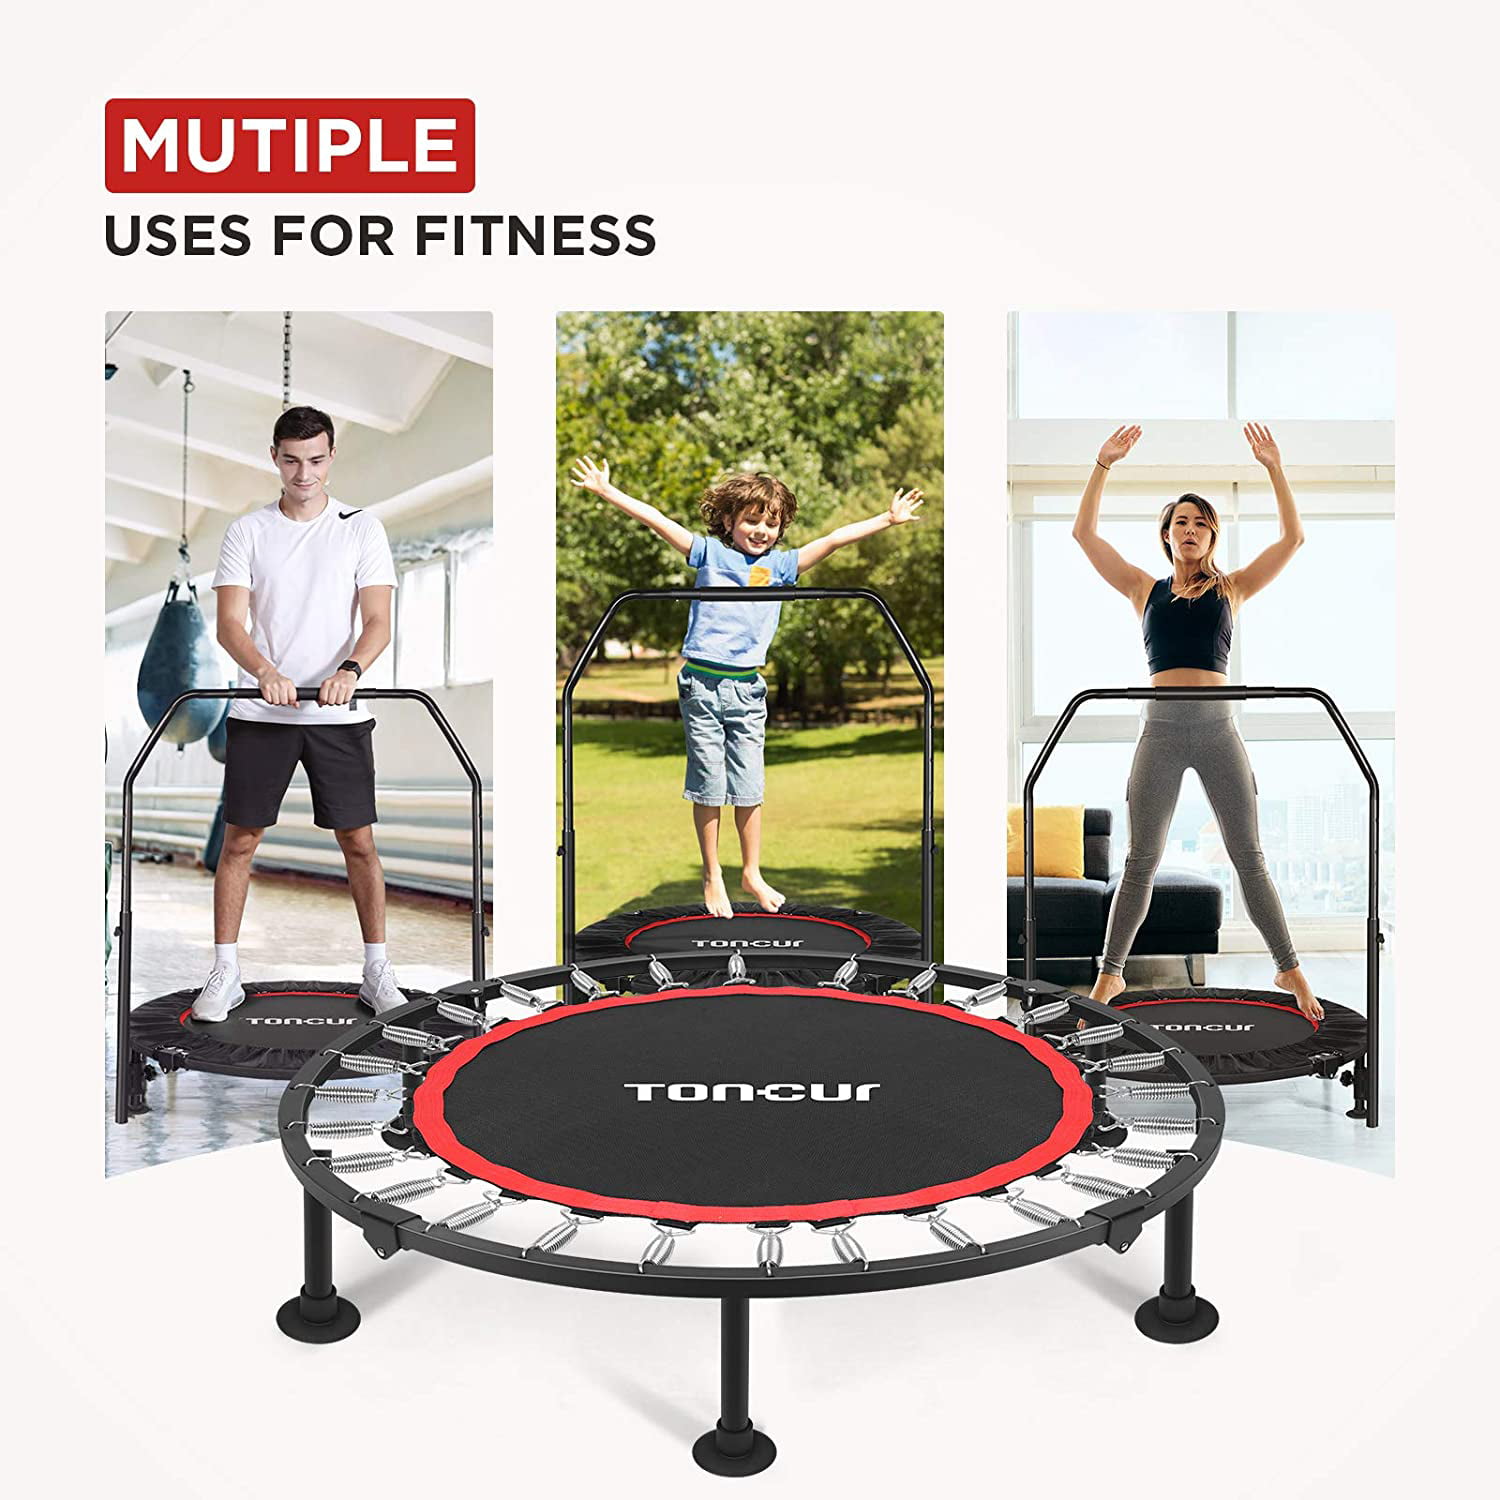 CANWAY 40 Foldable Mini Trampoline Fitness Rebounder Trampoline for Adults Kids with Adjustable Foam Handle Exercise Trampoline Indoor Outdoor Workout with 35pcs Springs Max Load 330lbs 